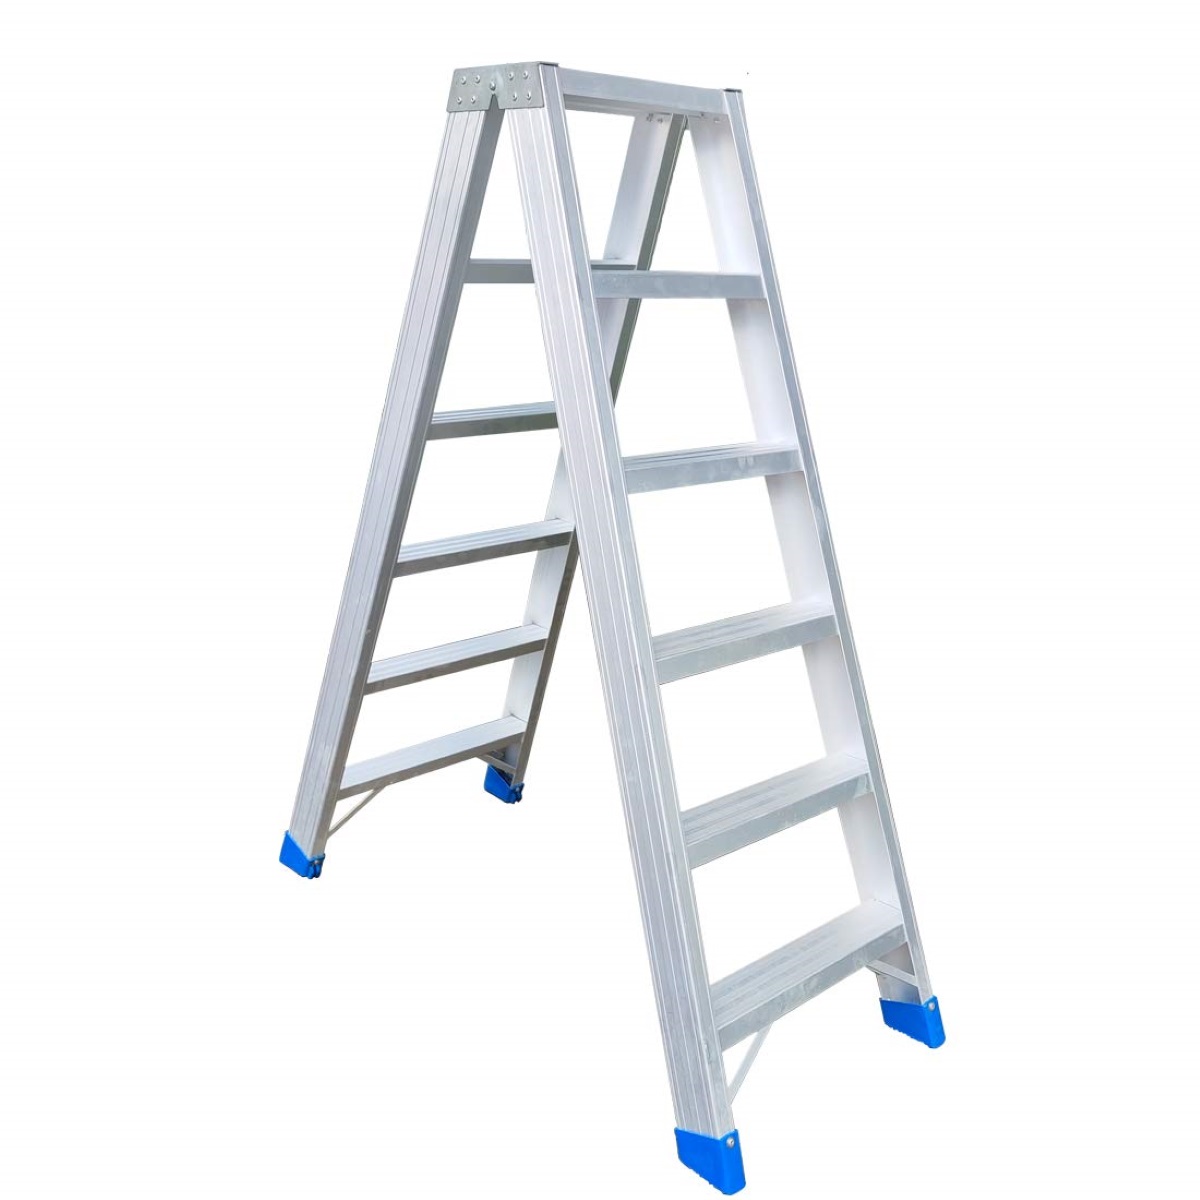 Which Ladder Is Self Supporting